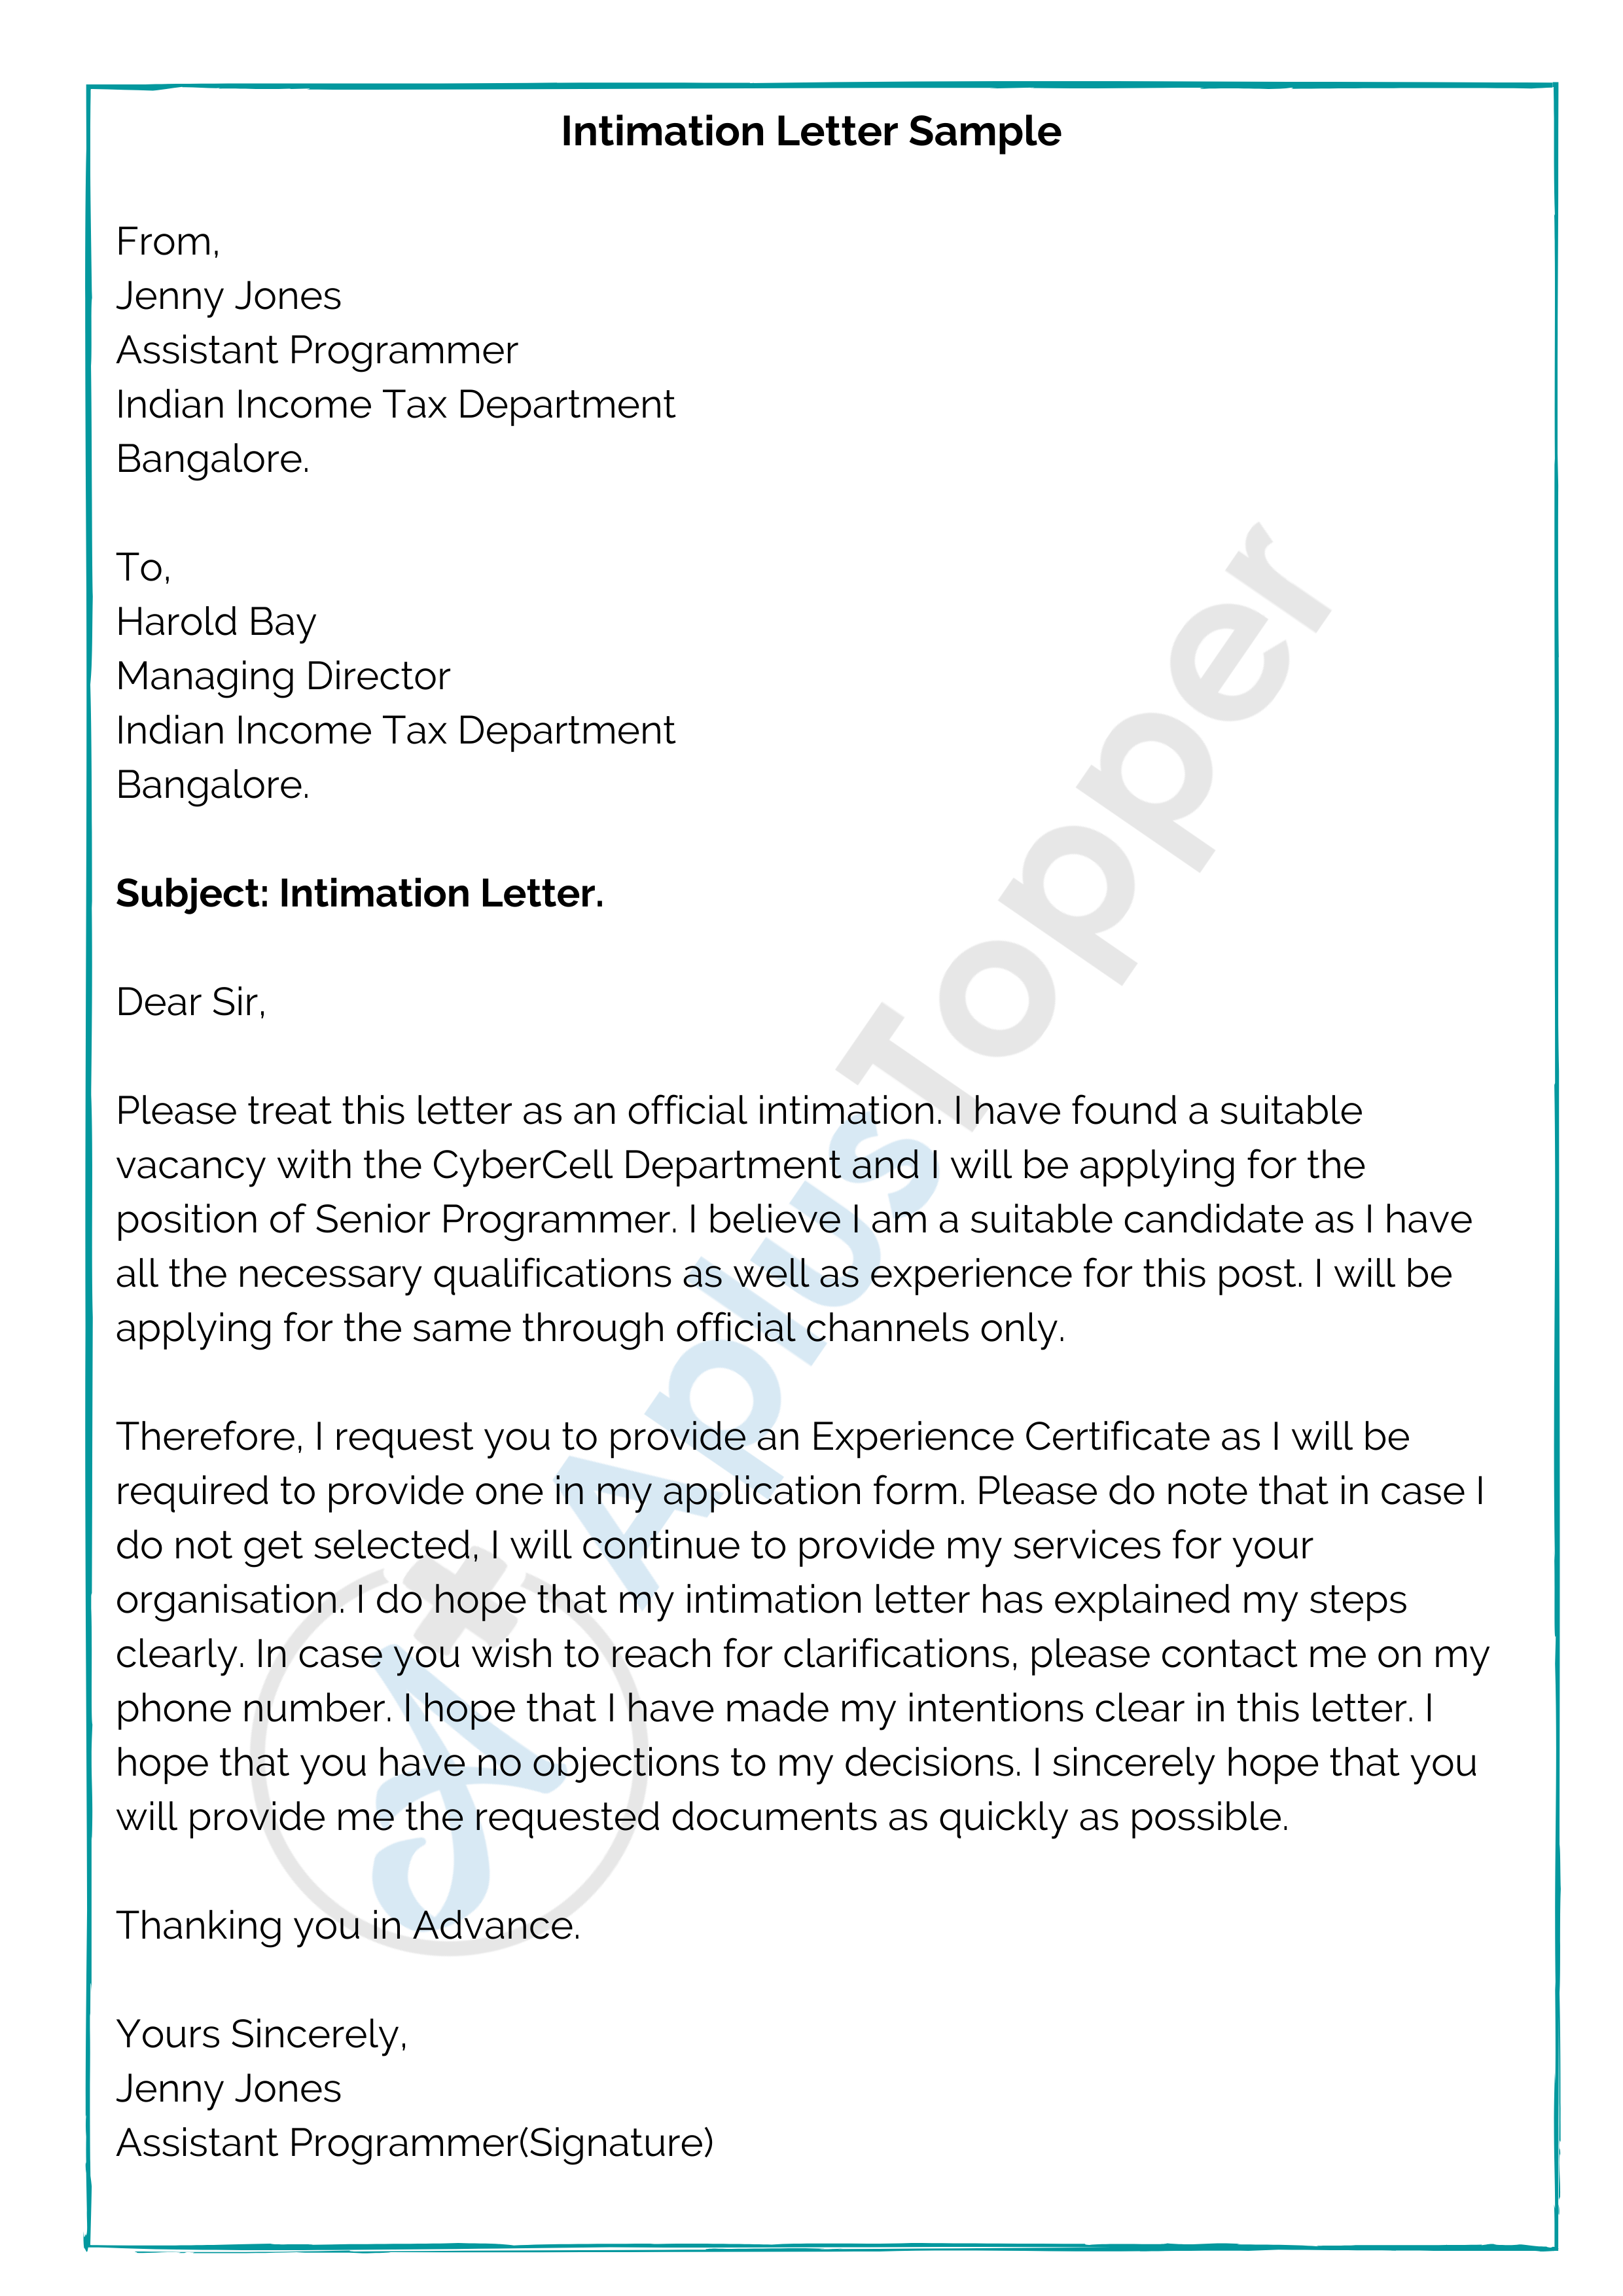 Intimation Letter Download